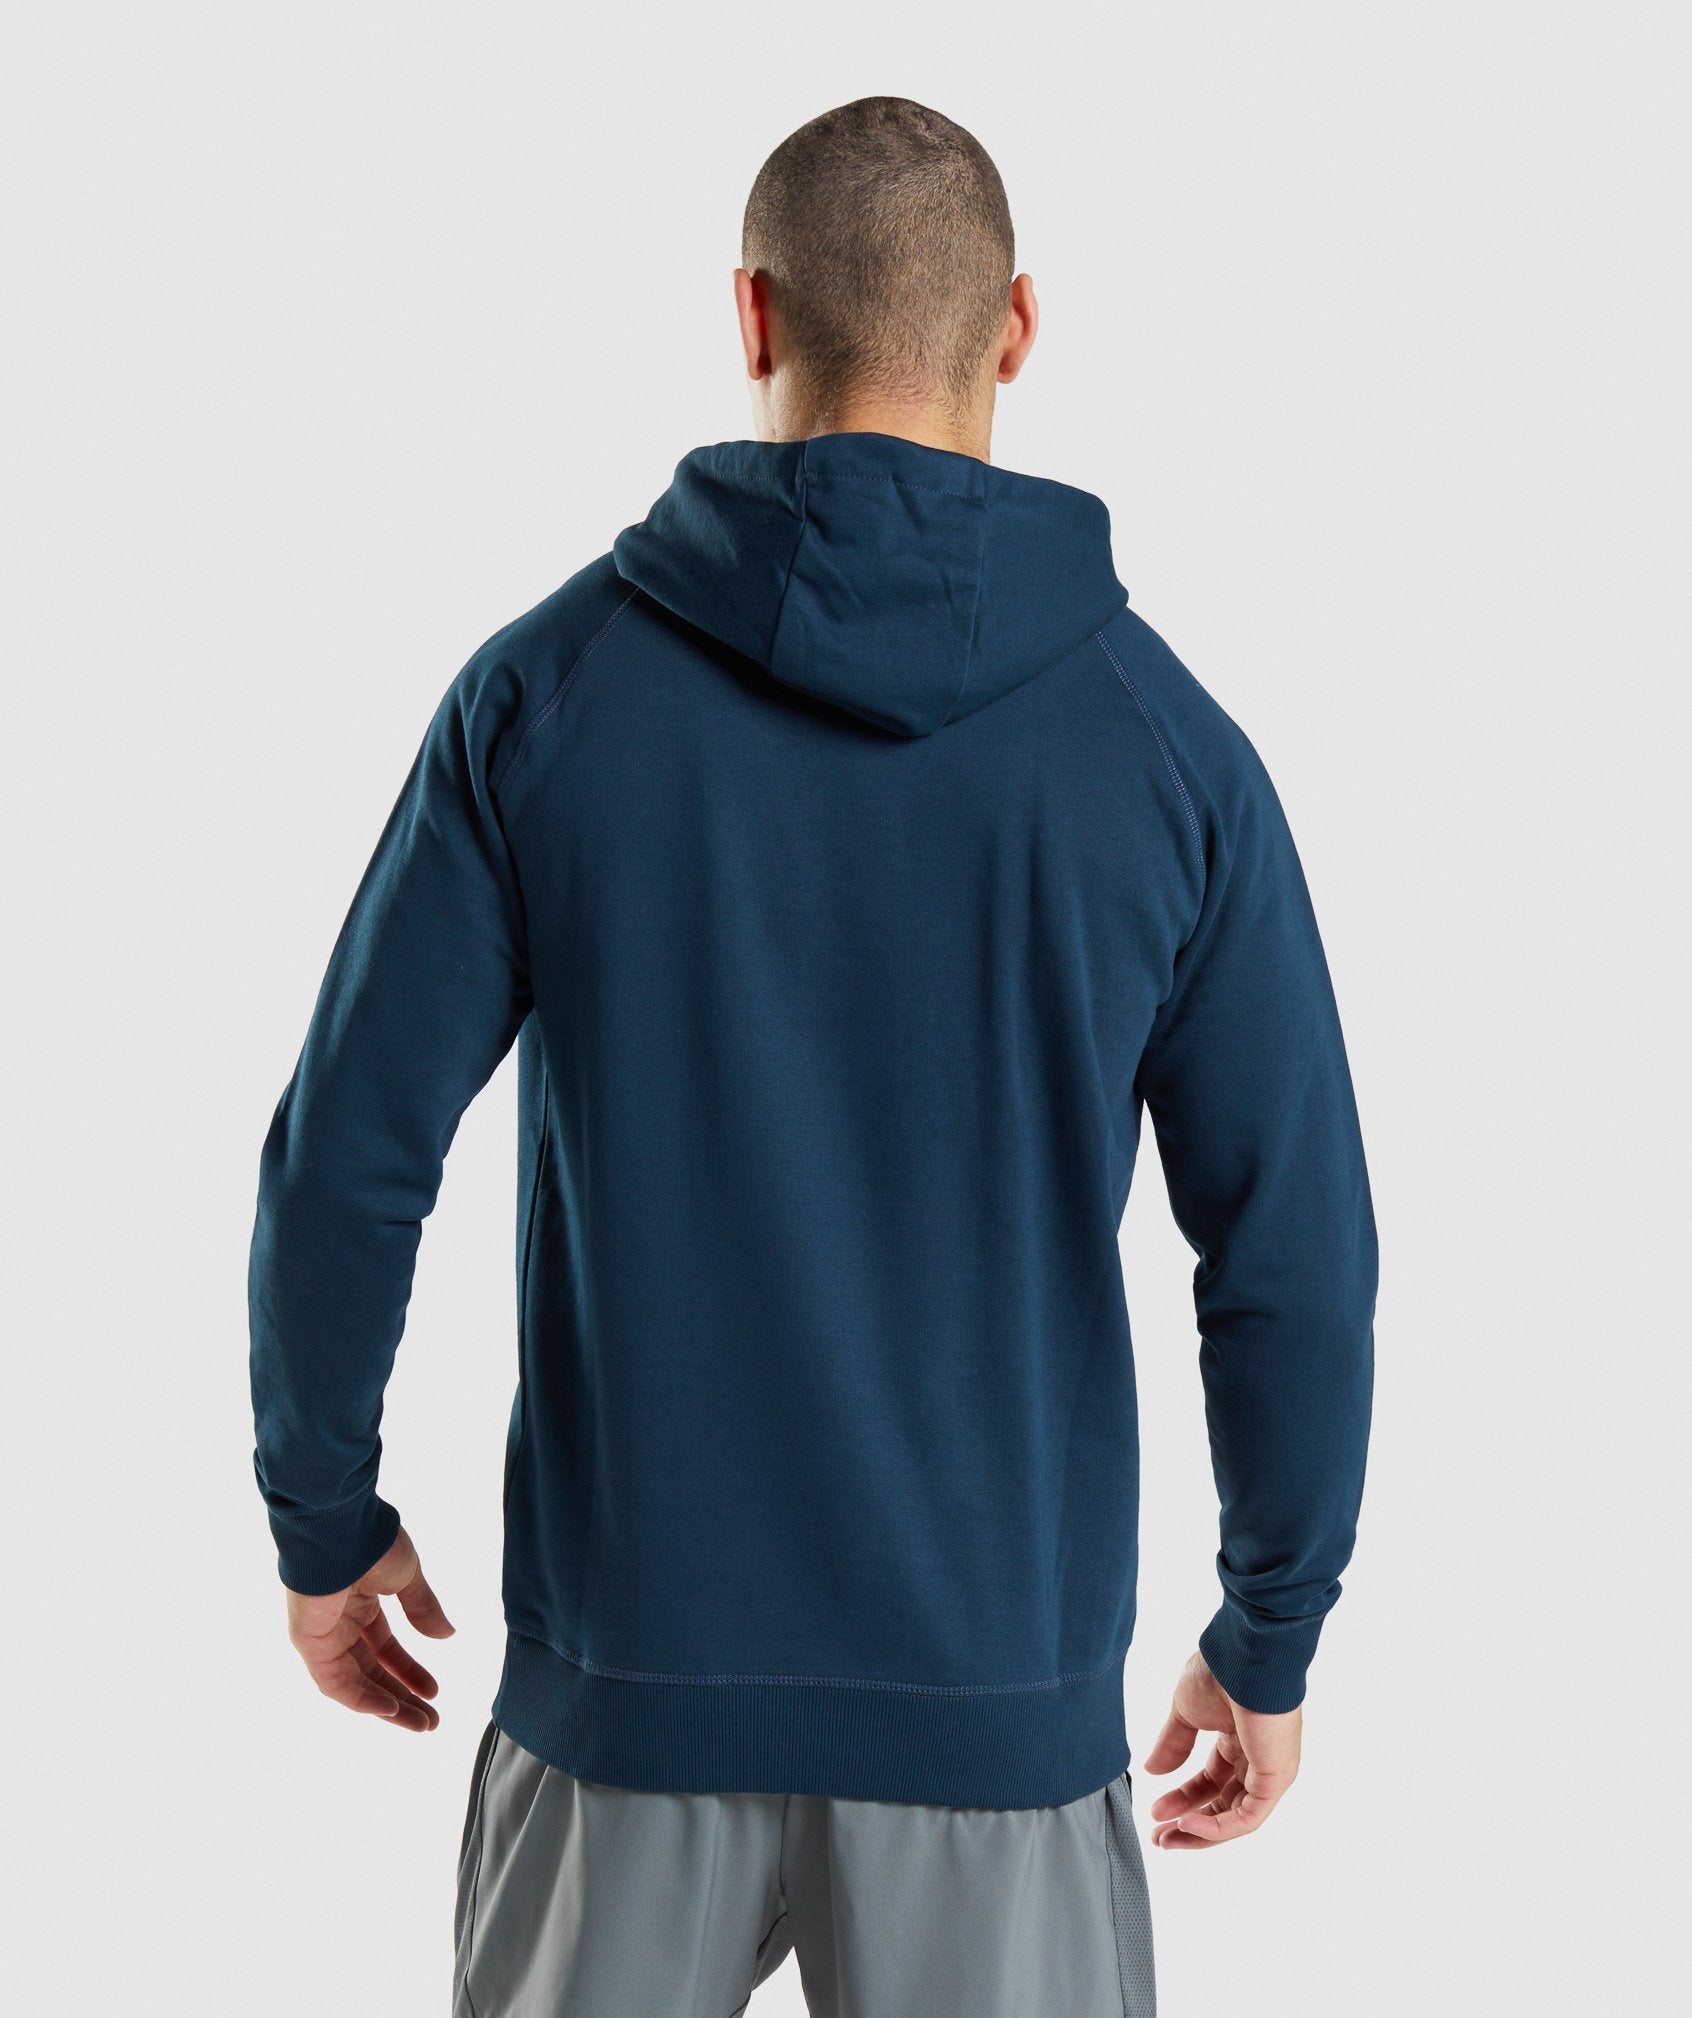 Sharkhead Infill Hoodie in Navy - view 2